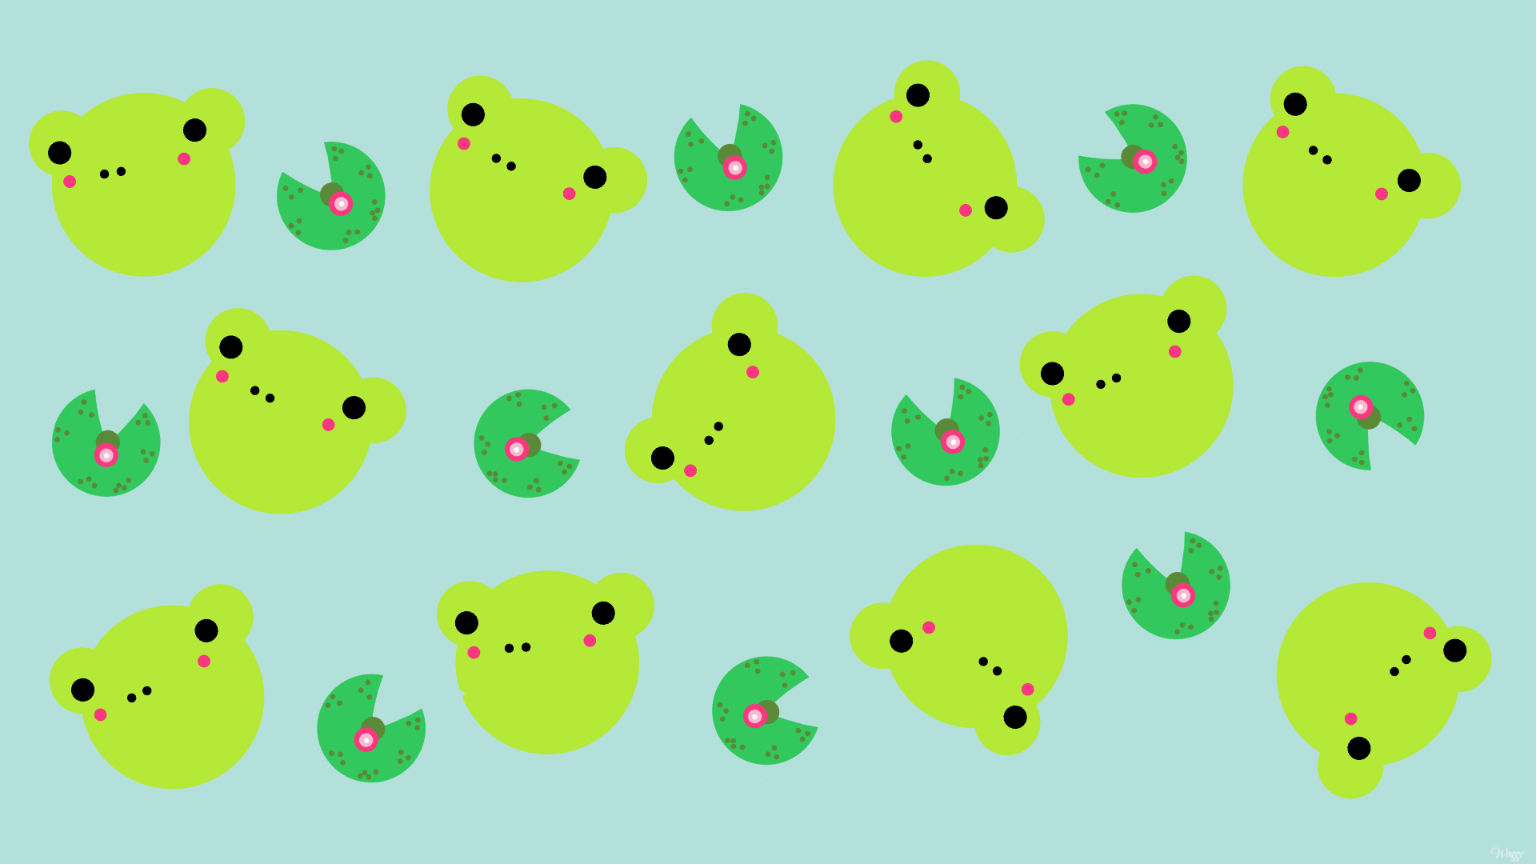 Simple Frogs Lilypads [1920 x 1080]. Frog wallpaper, Wallpaper iphone cute, Frog art